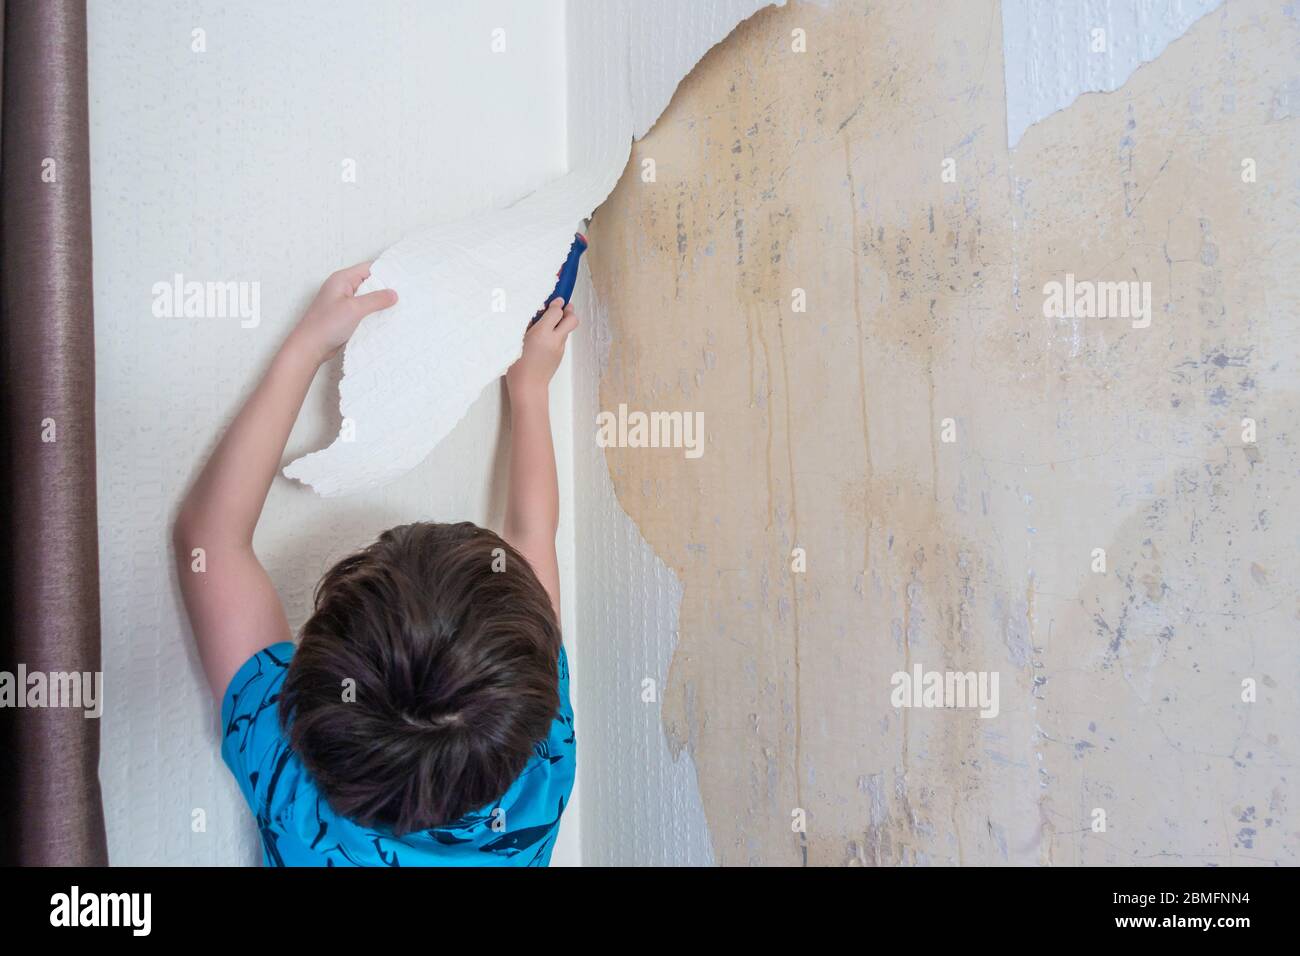 A child helps strip old wallpaper off a wall as the first stage of ...